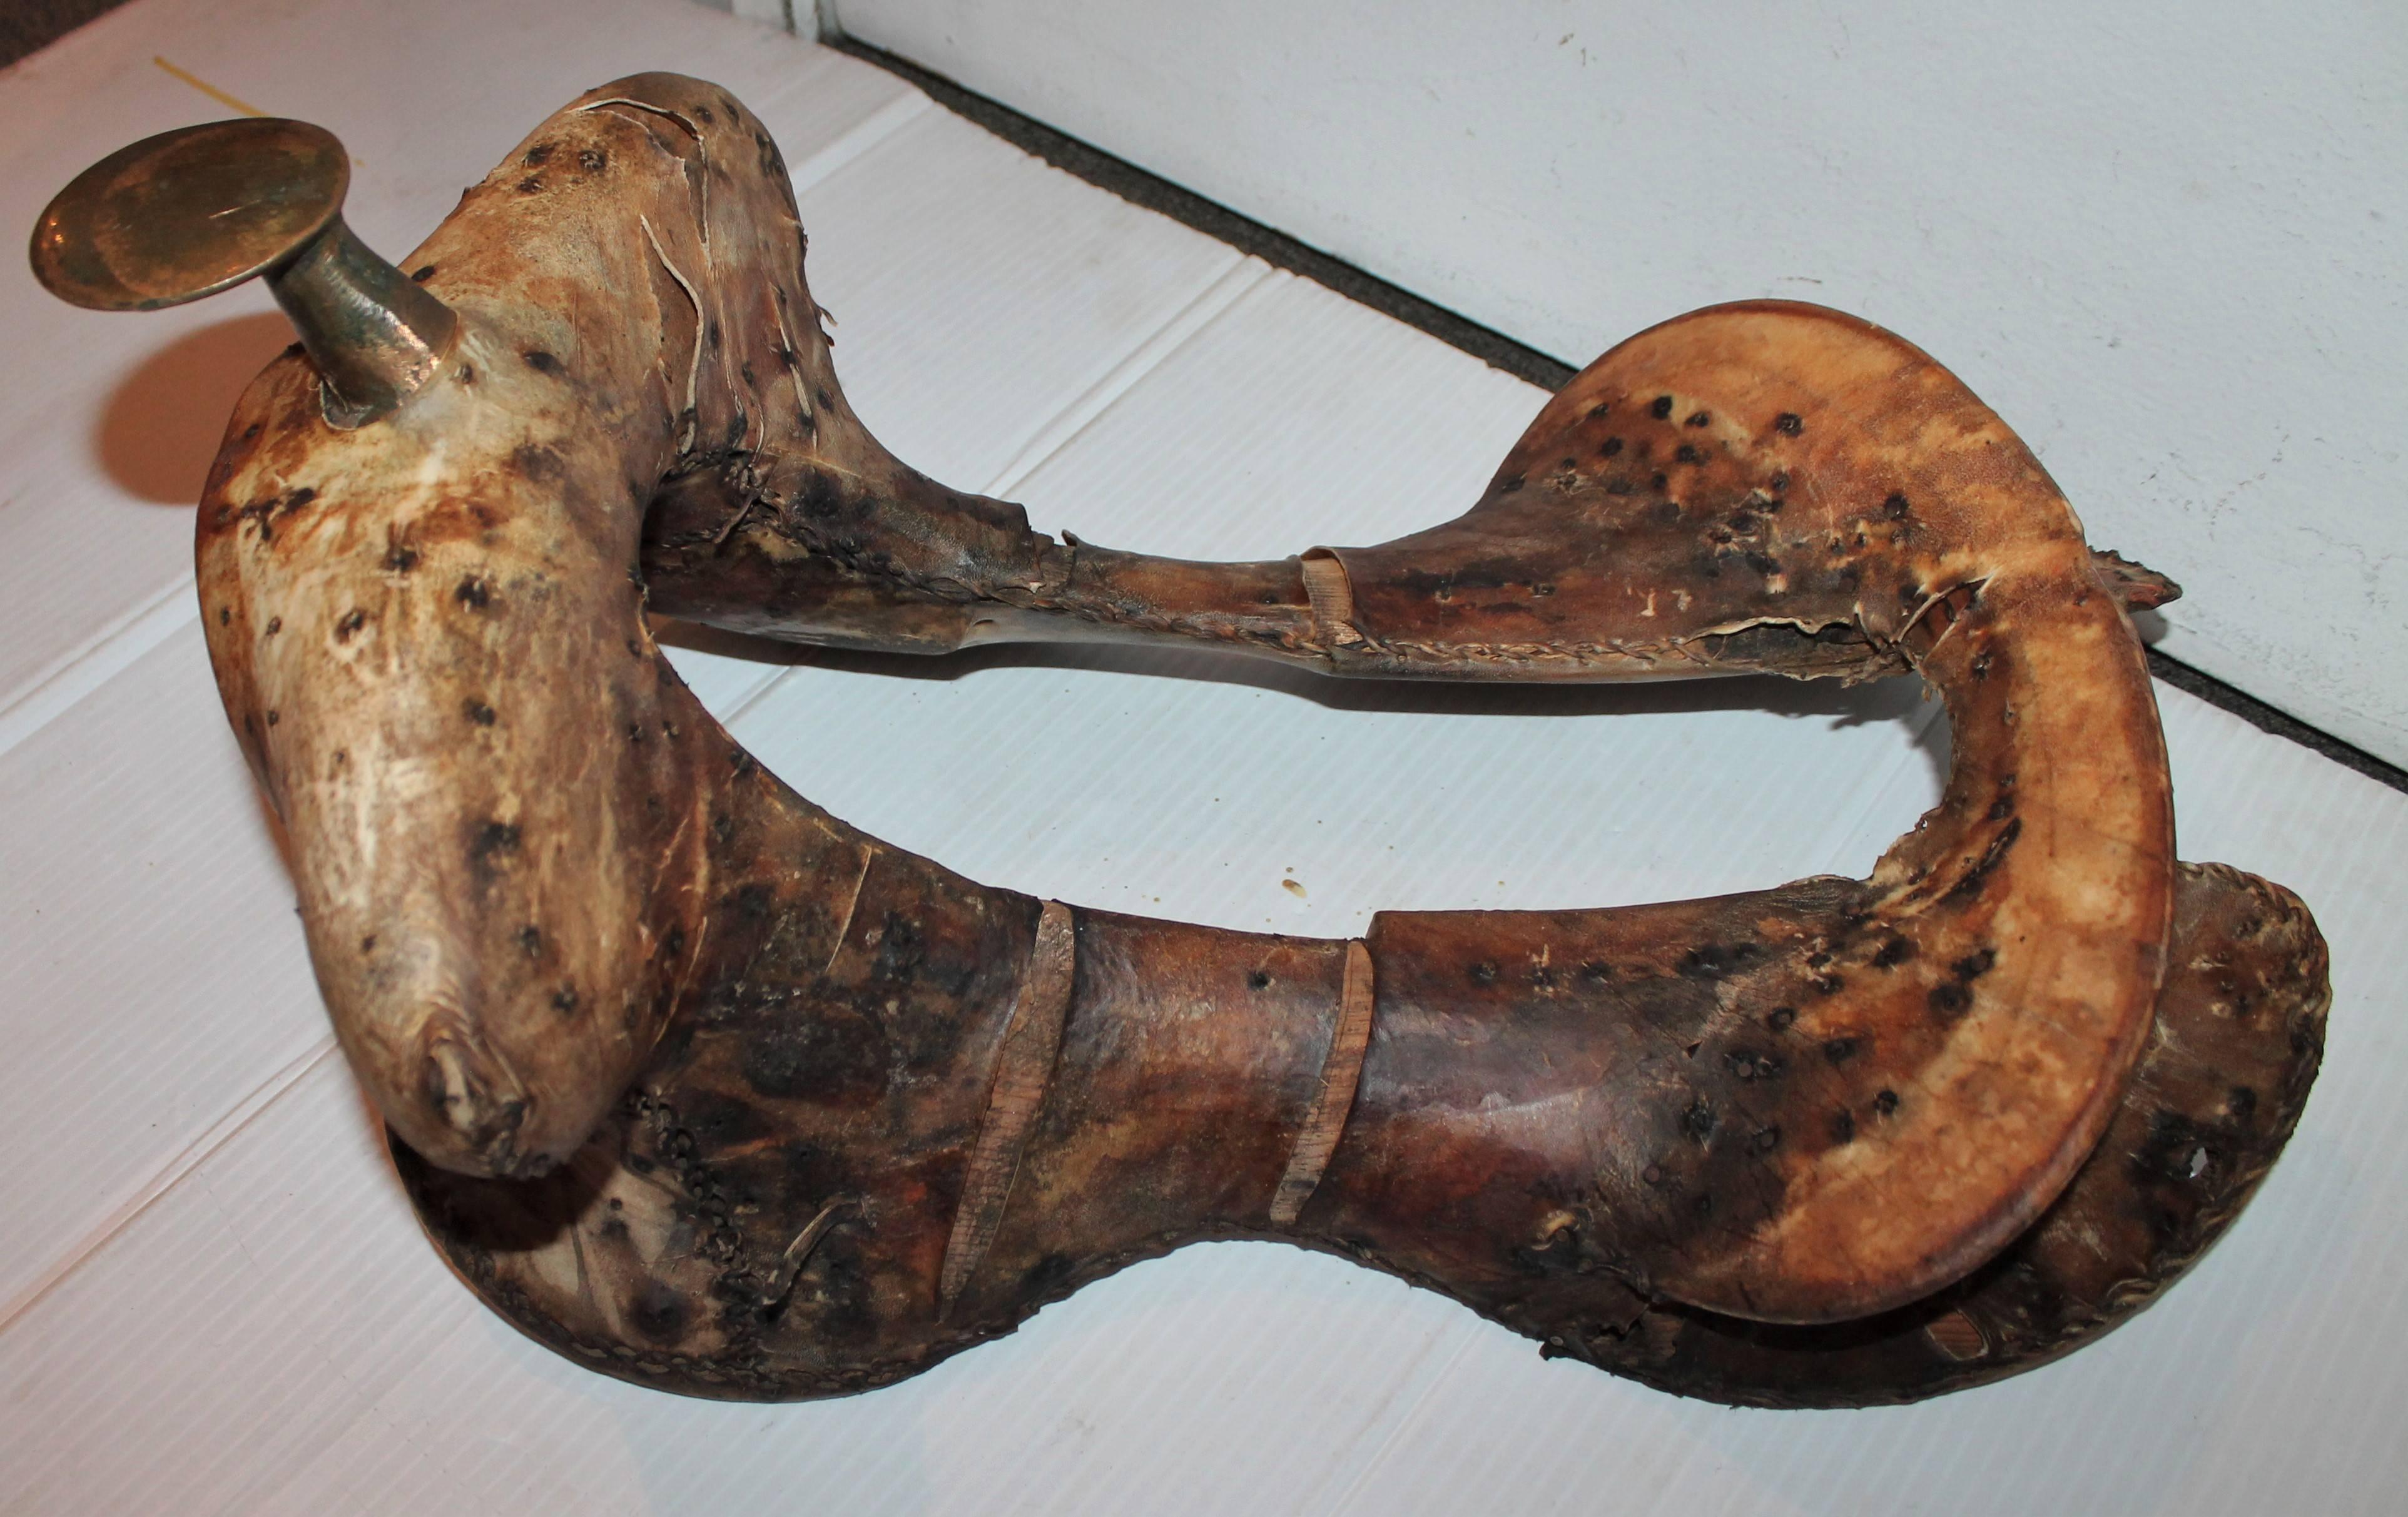 This rustic cow hide or rawhide over wood saddle form was found in Texas and is in as found condition. This is known as the saddles base or tree form.